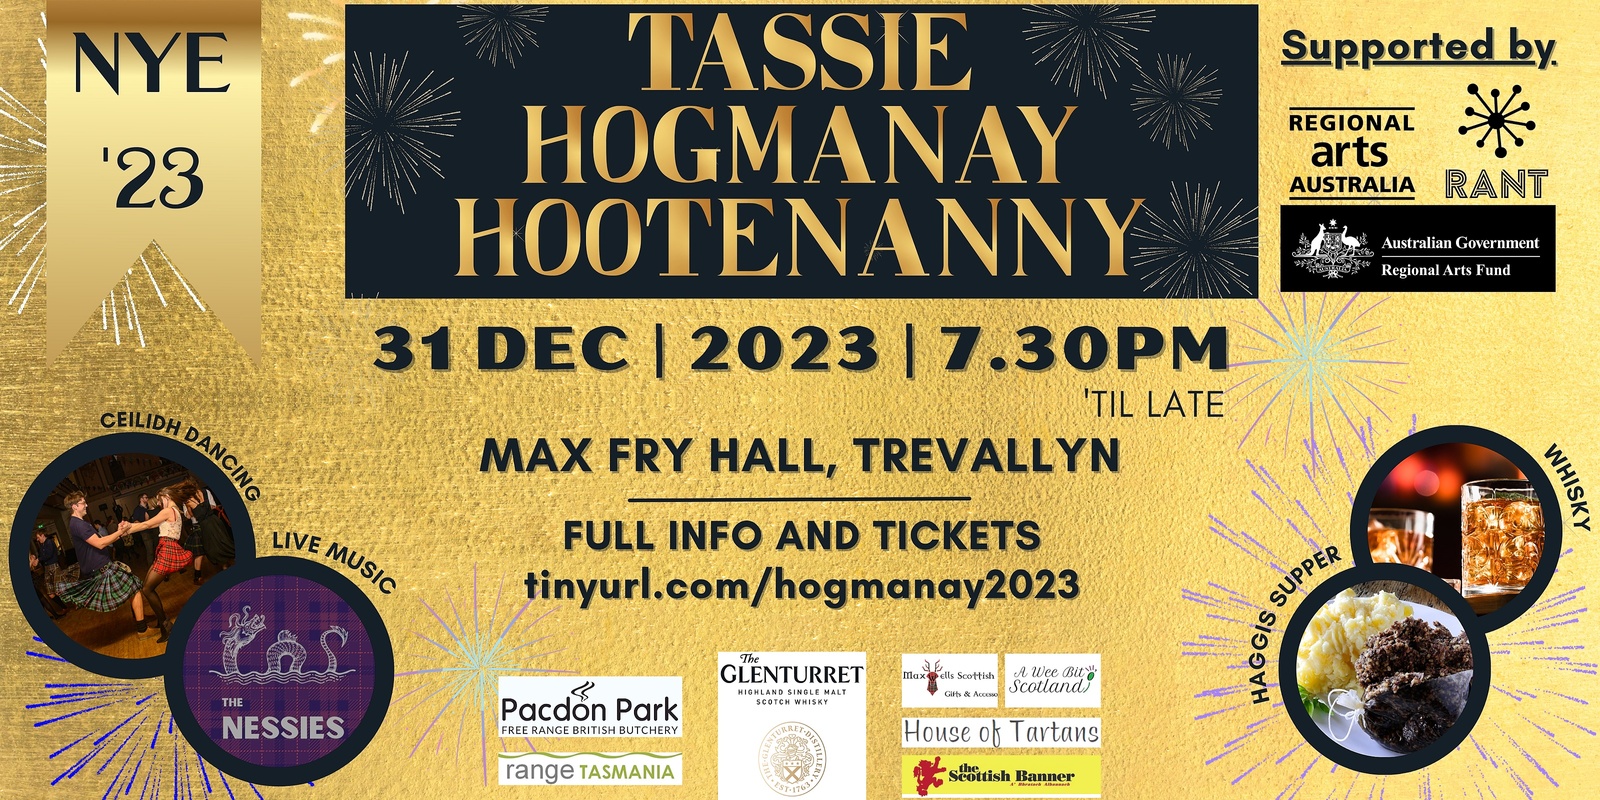 Banner image for The Nessies: Hogmanay Hootenanny